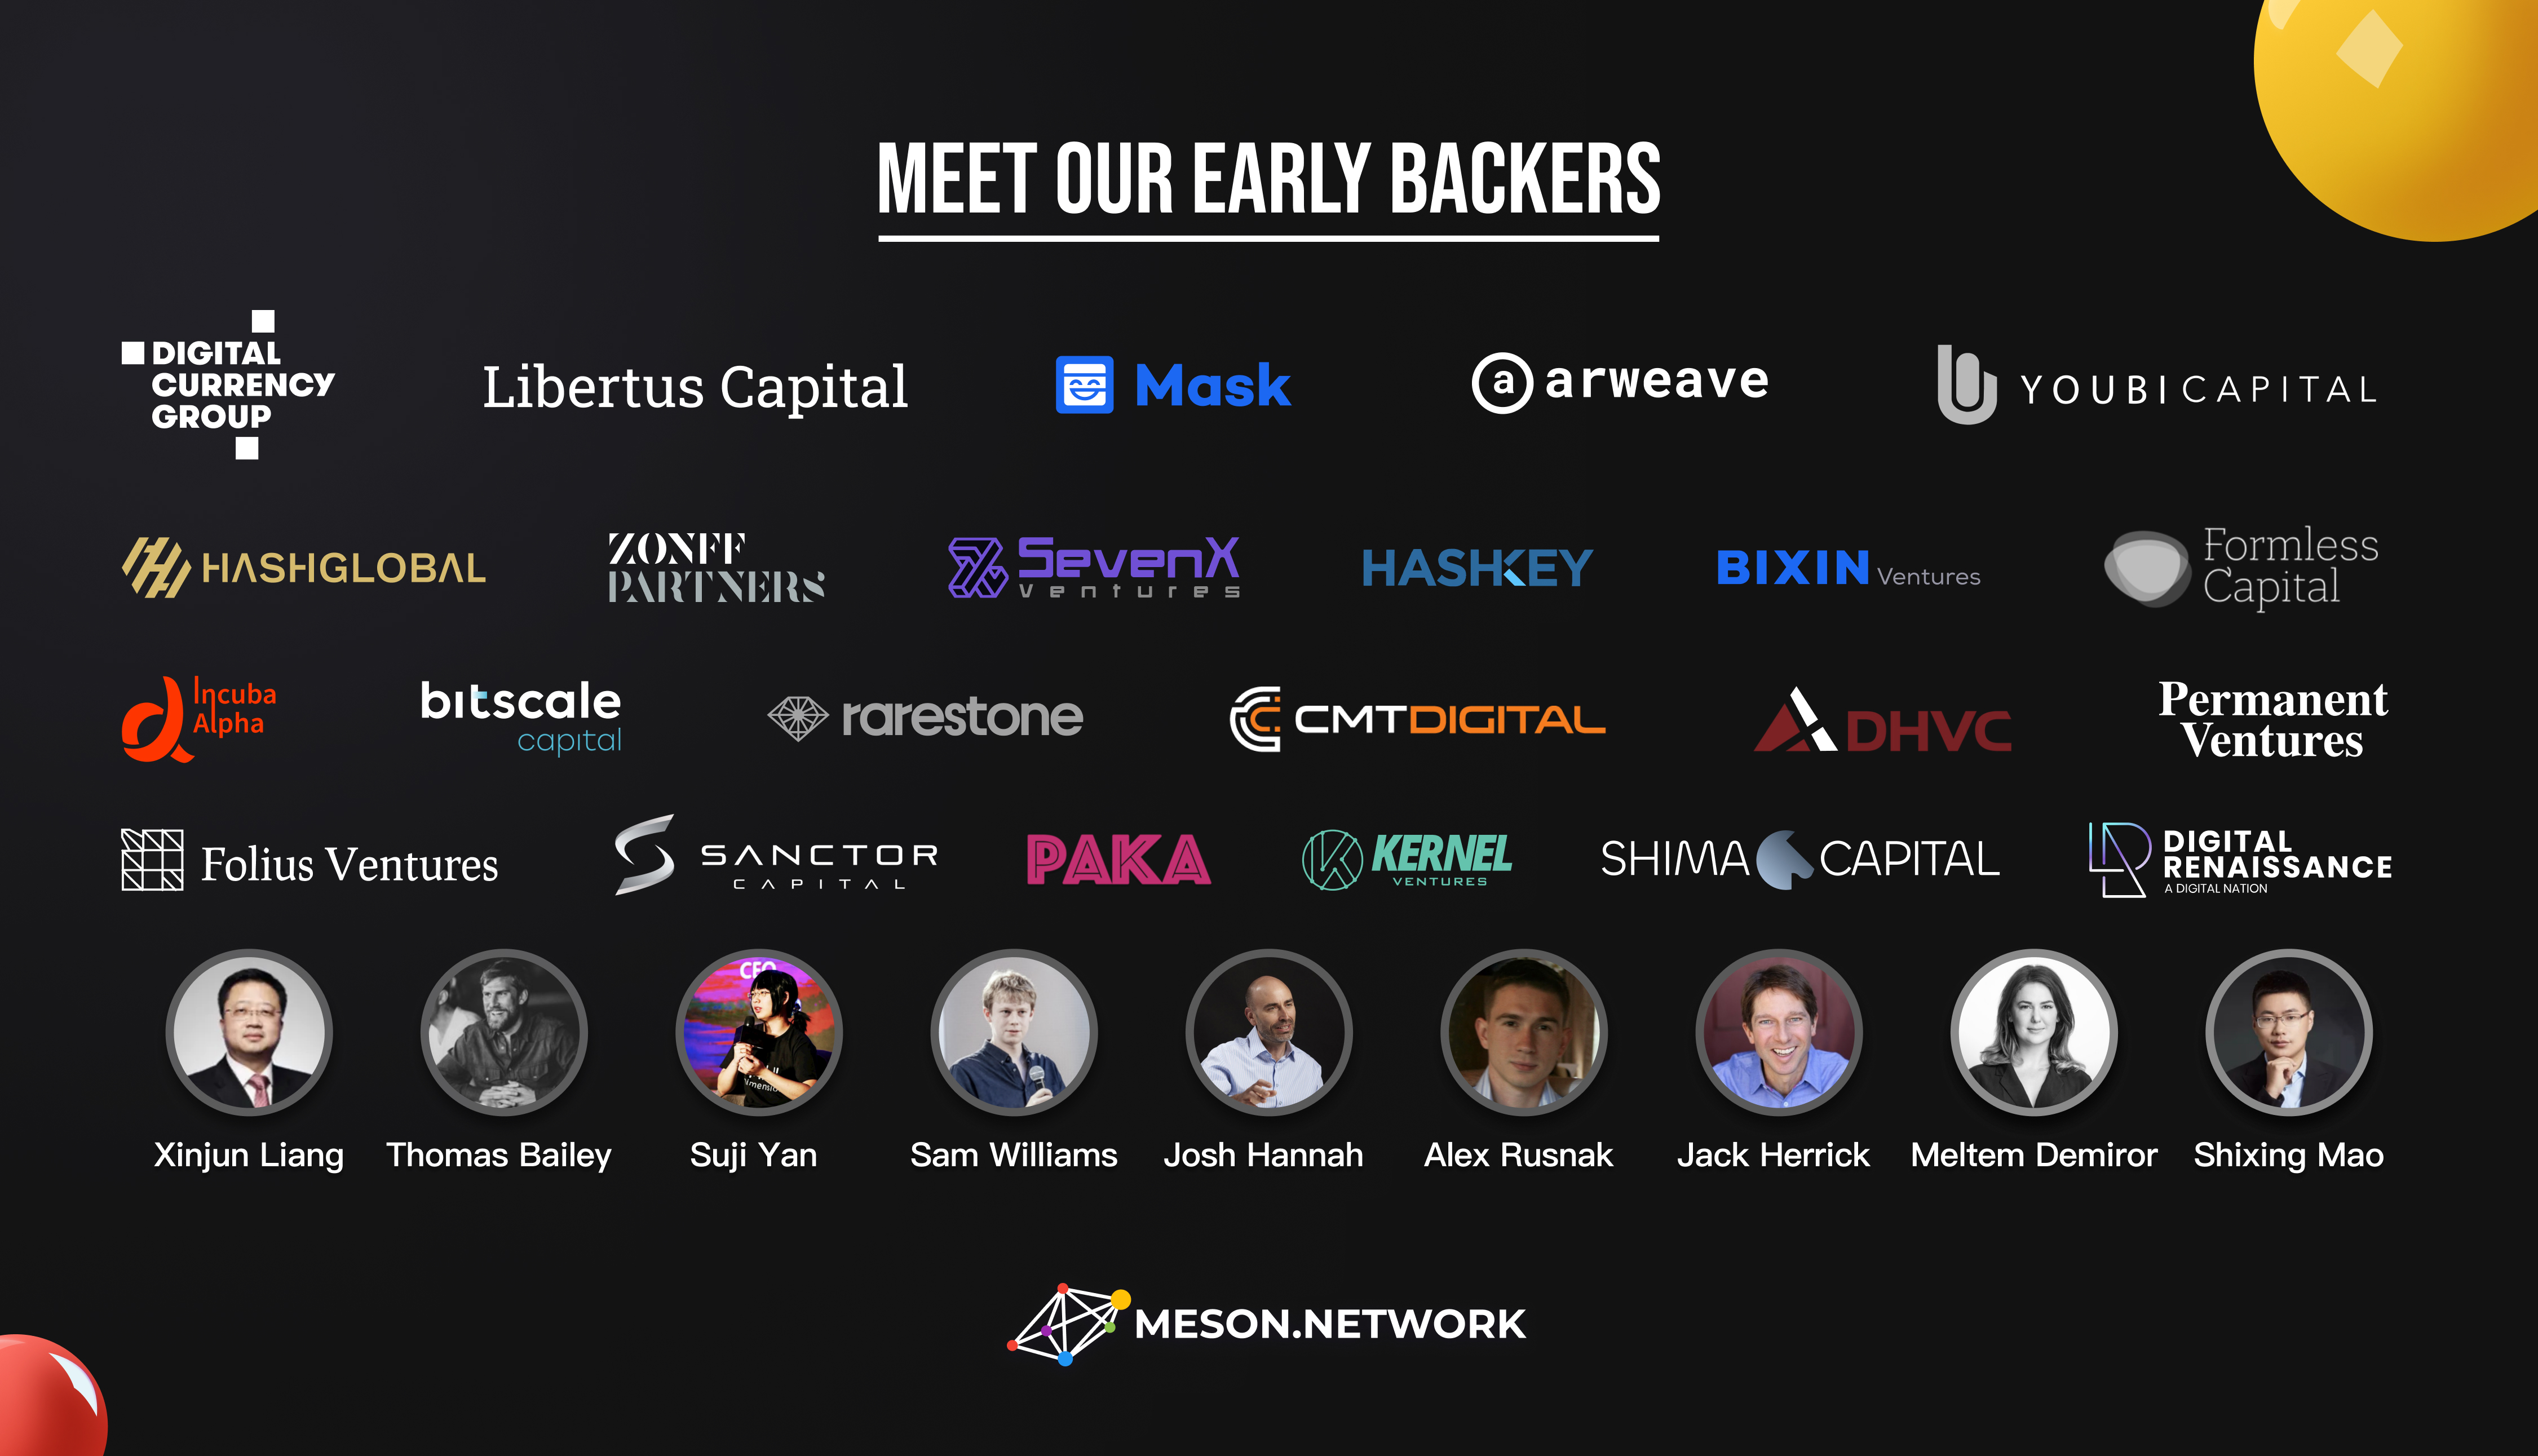 meet our early backers.jpg